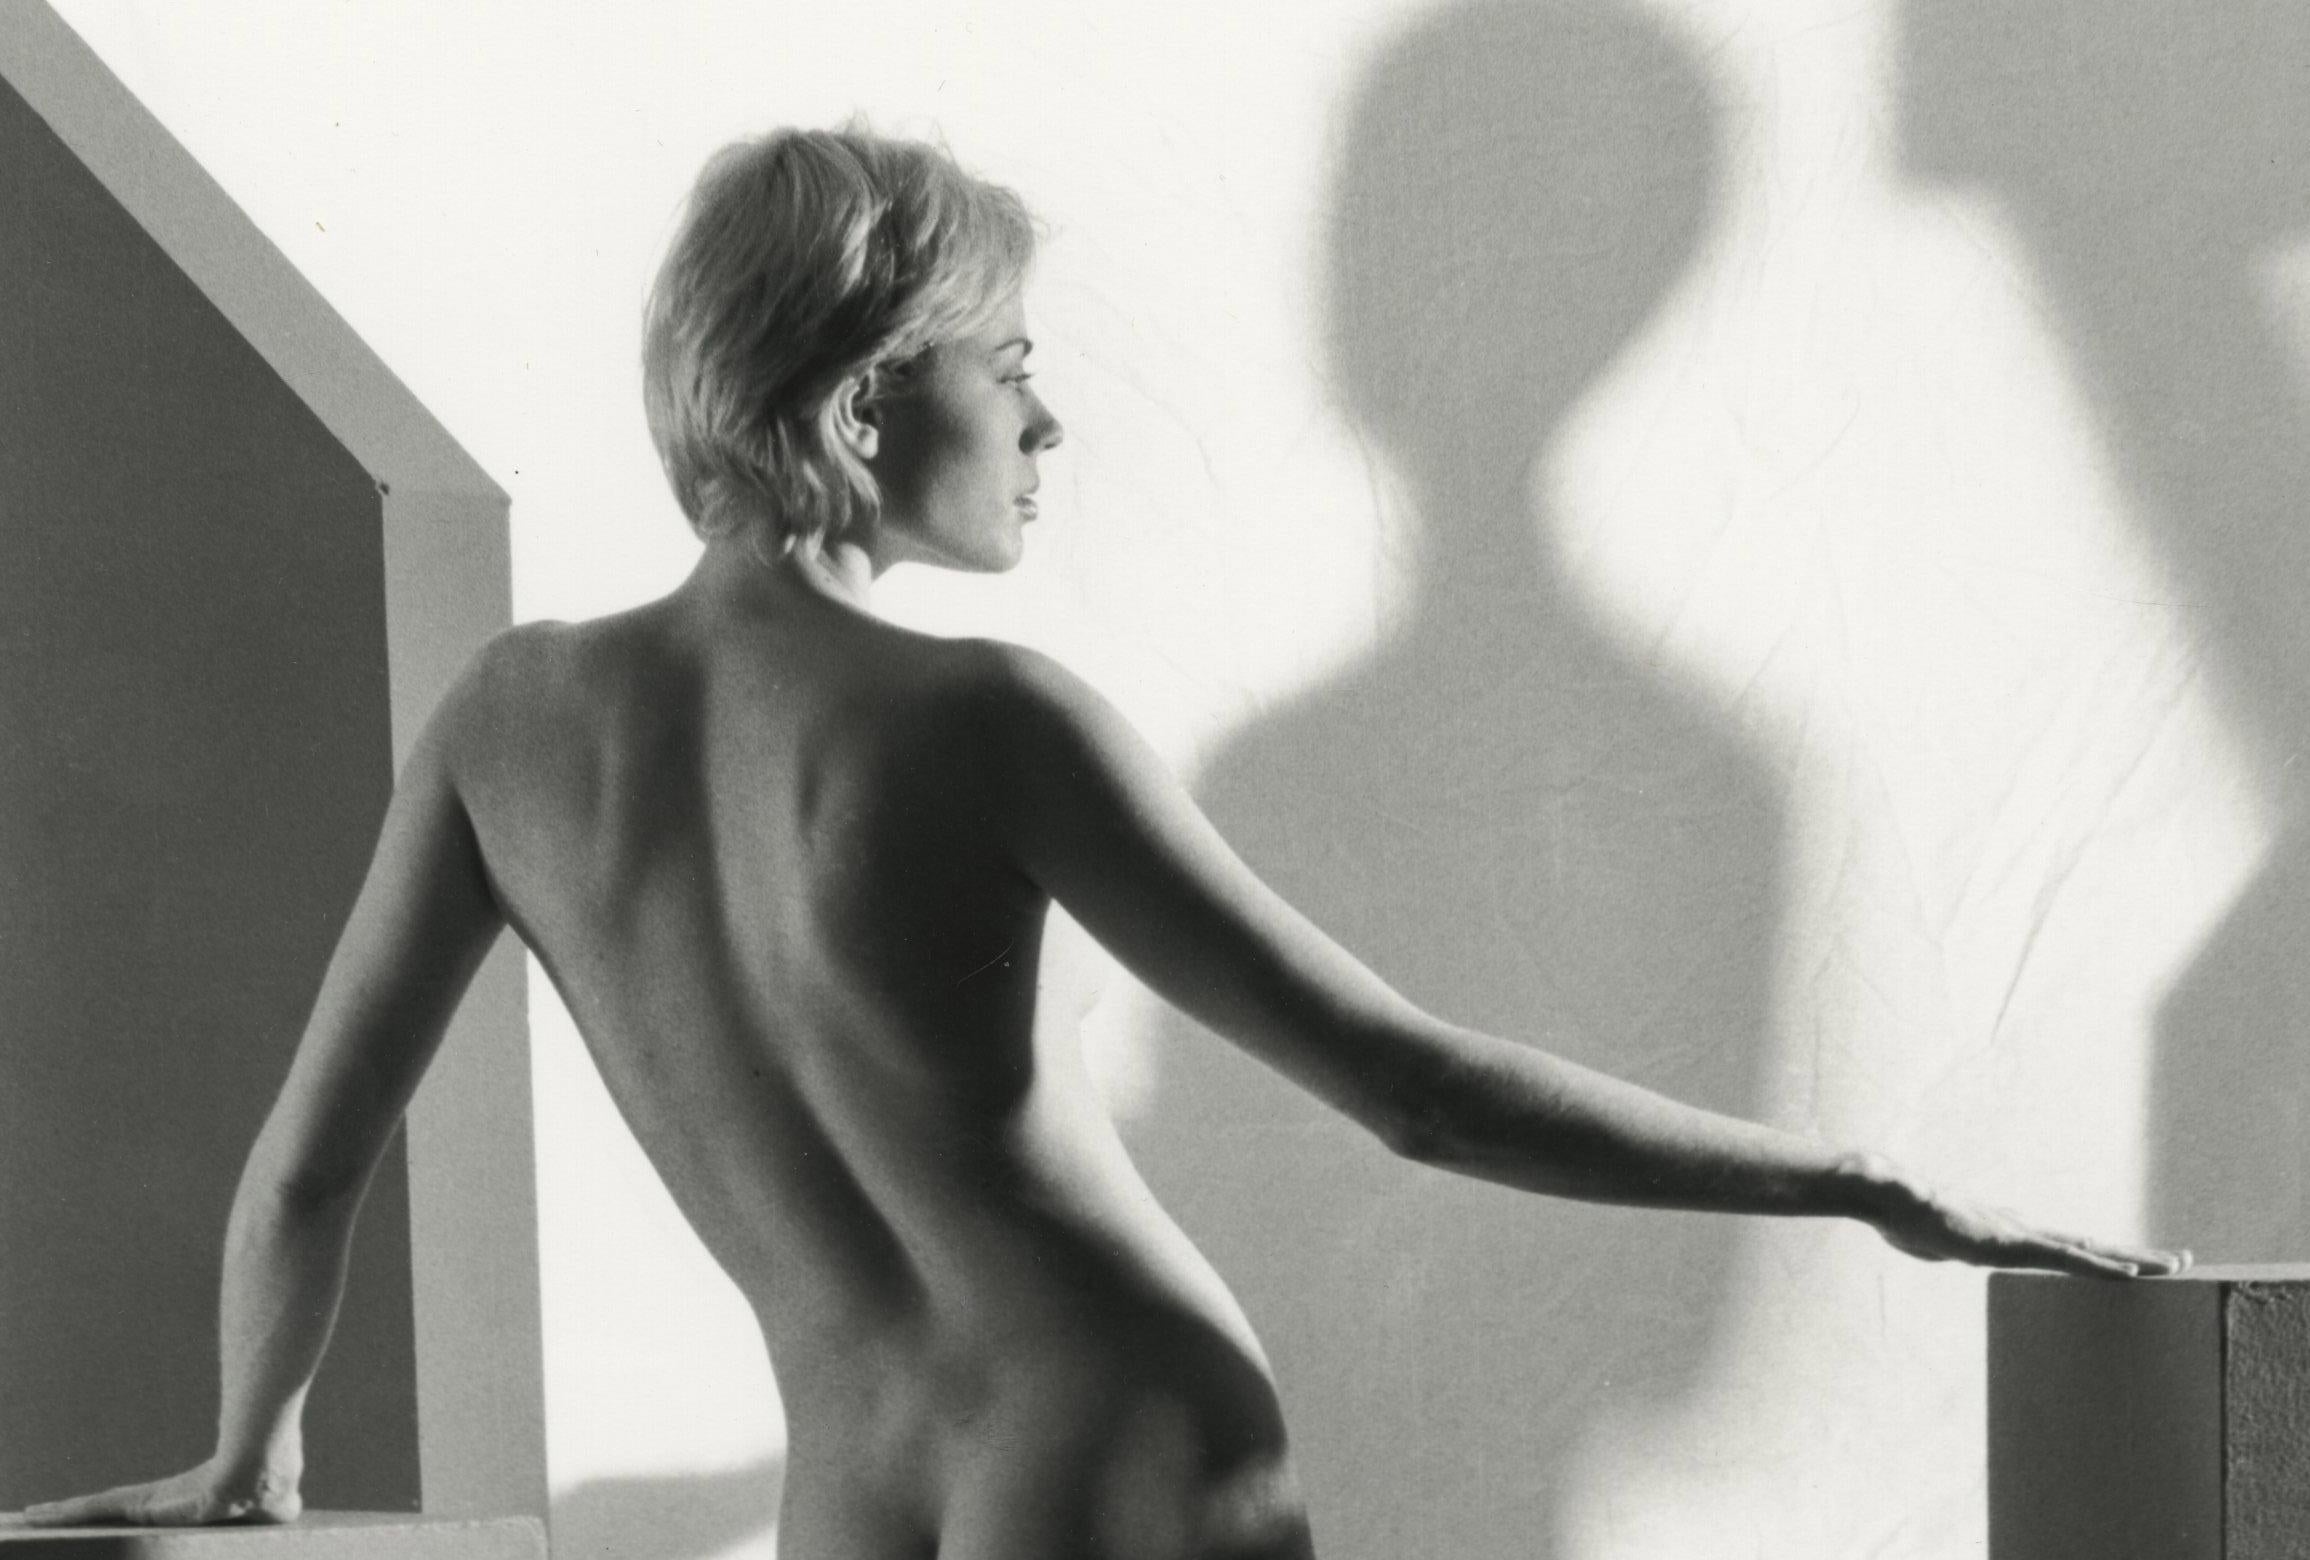 Shadow Magic - Photograph by Guenter Knop